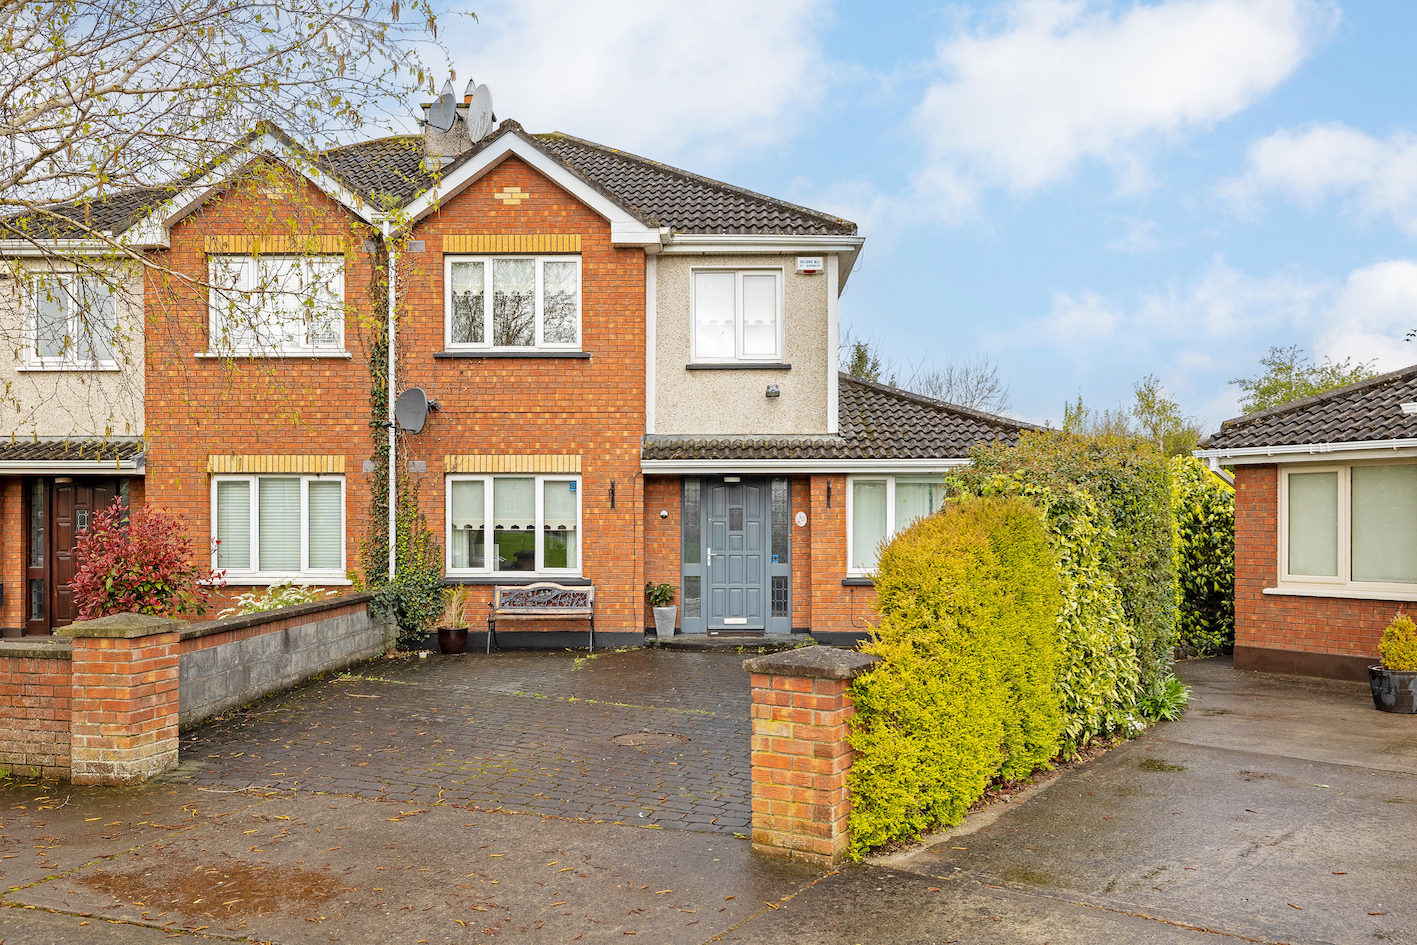 10 Parklands Court, Maynooth, Co. Kildare, W23 R822